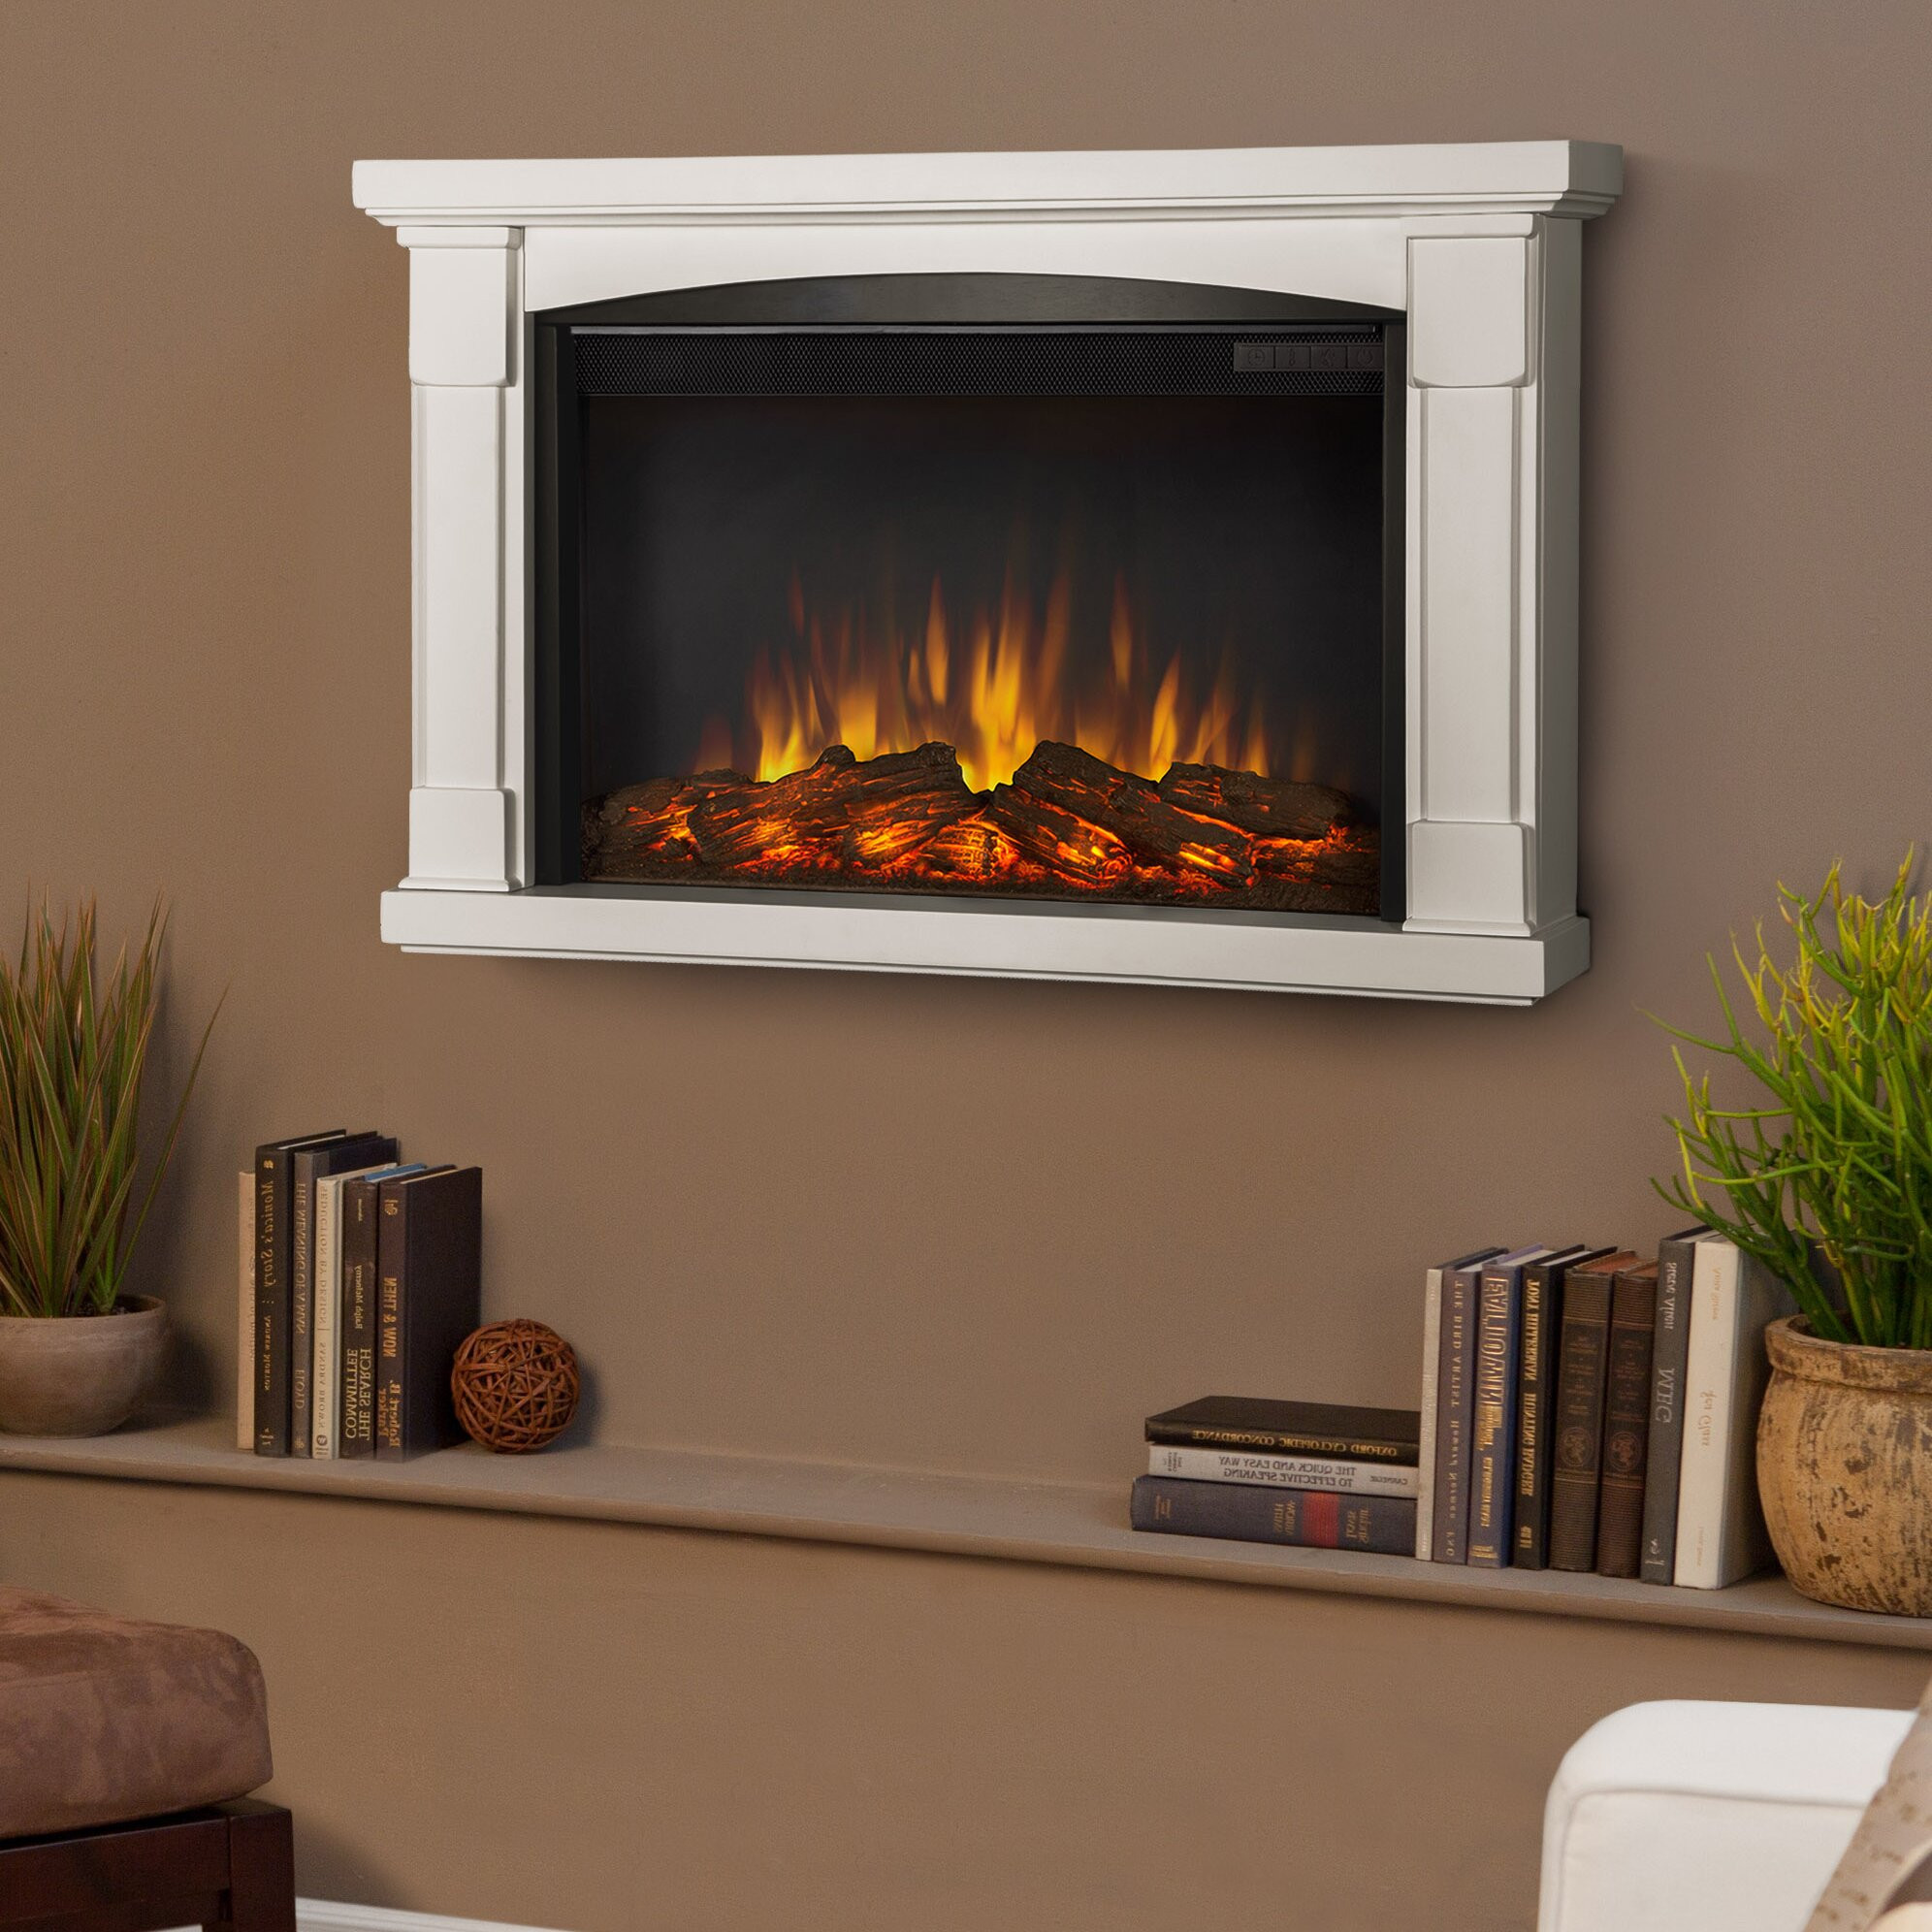 Wall Fireplace Electric
 Slim Brighton Wall Mounted Electric Fireplace